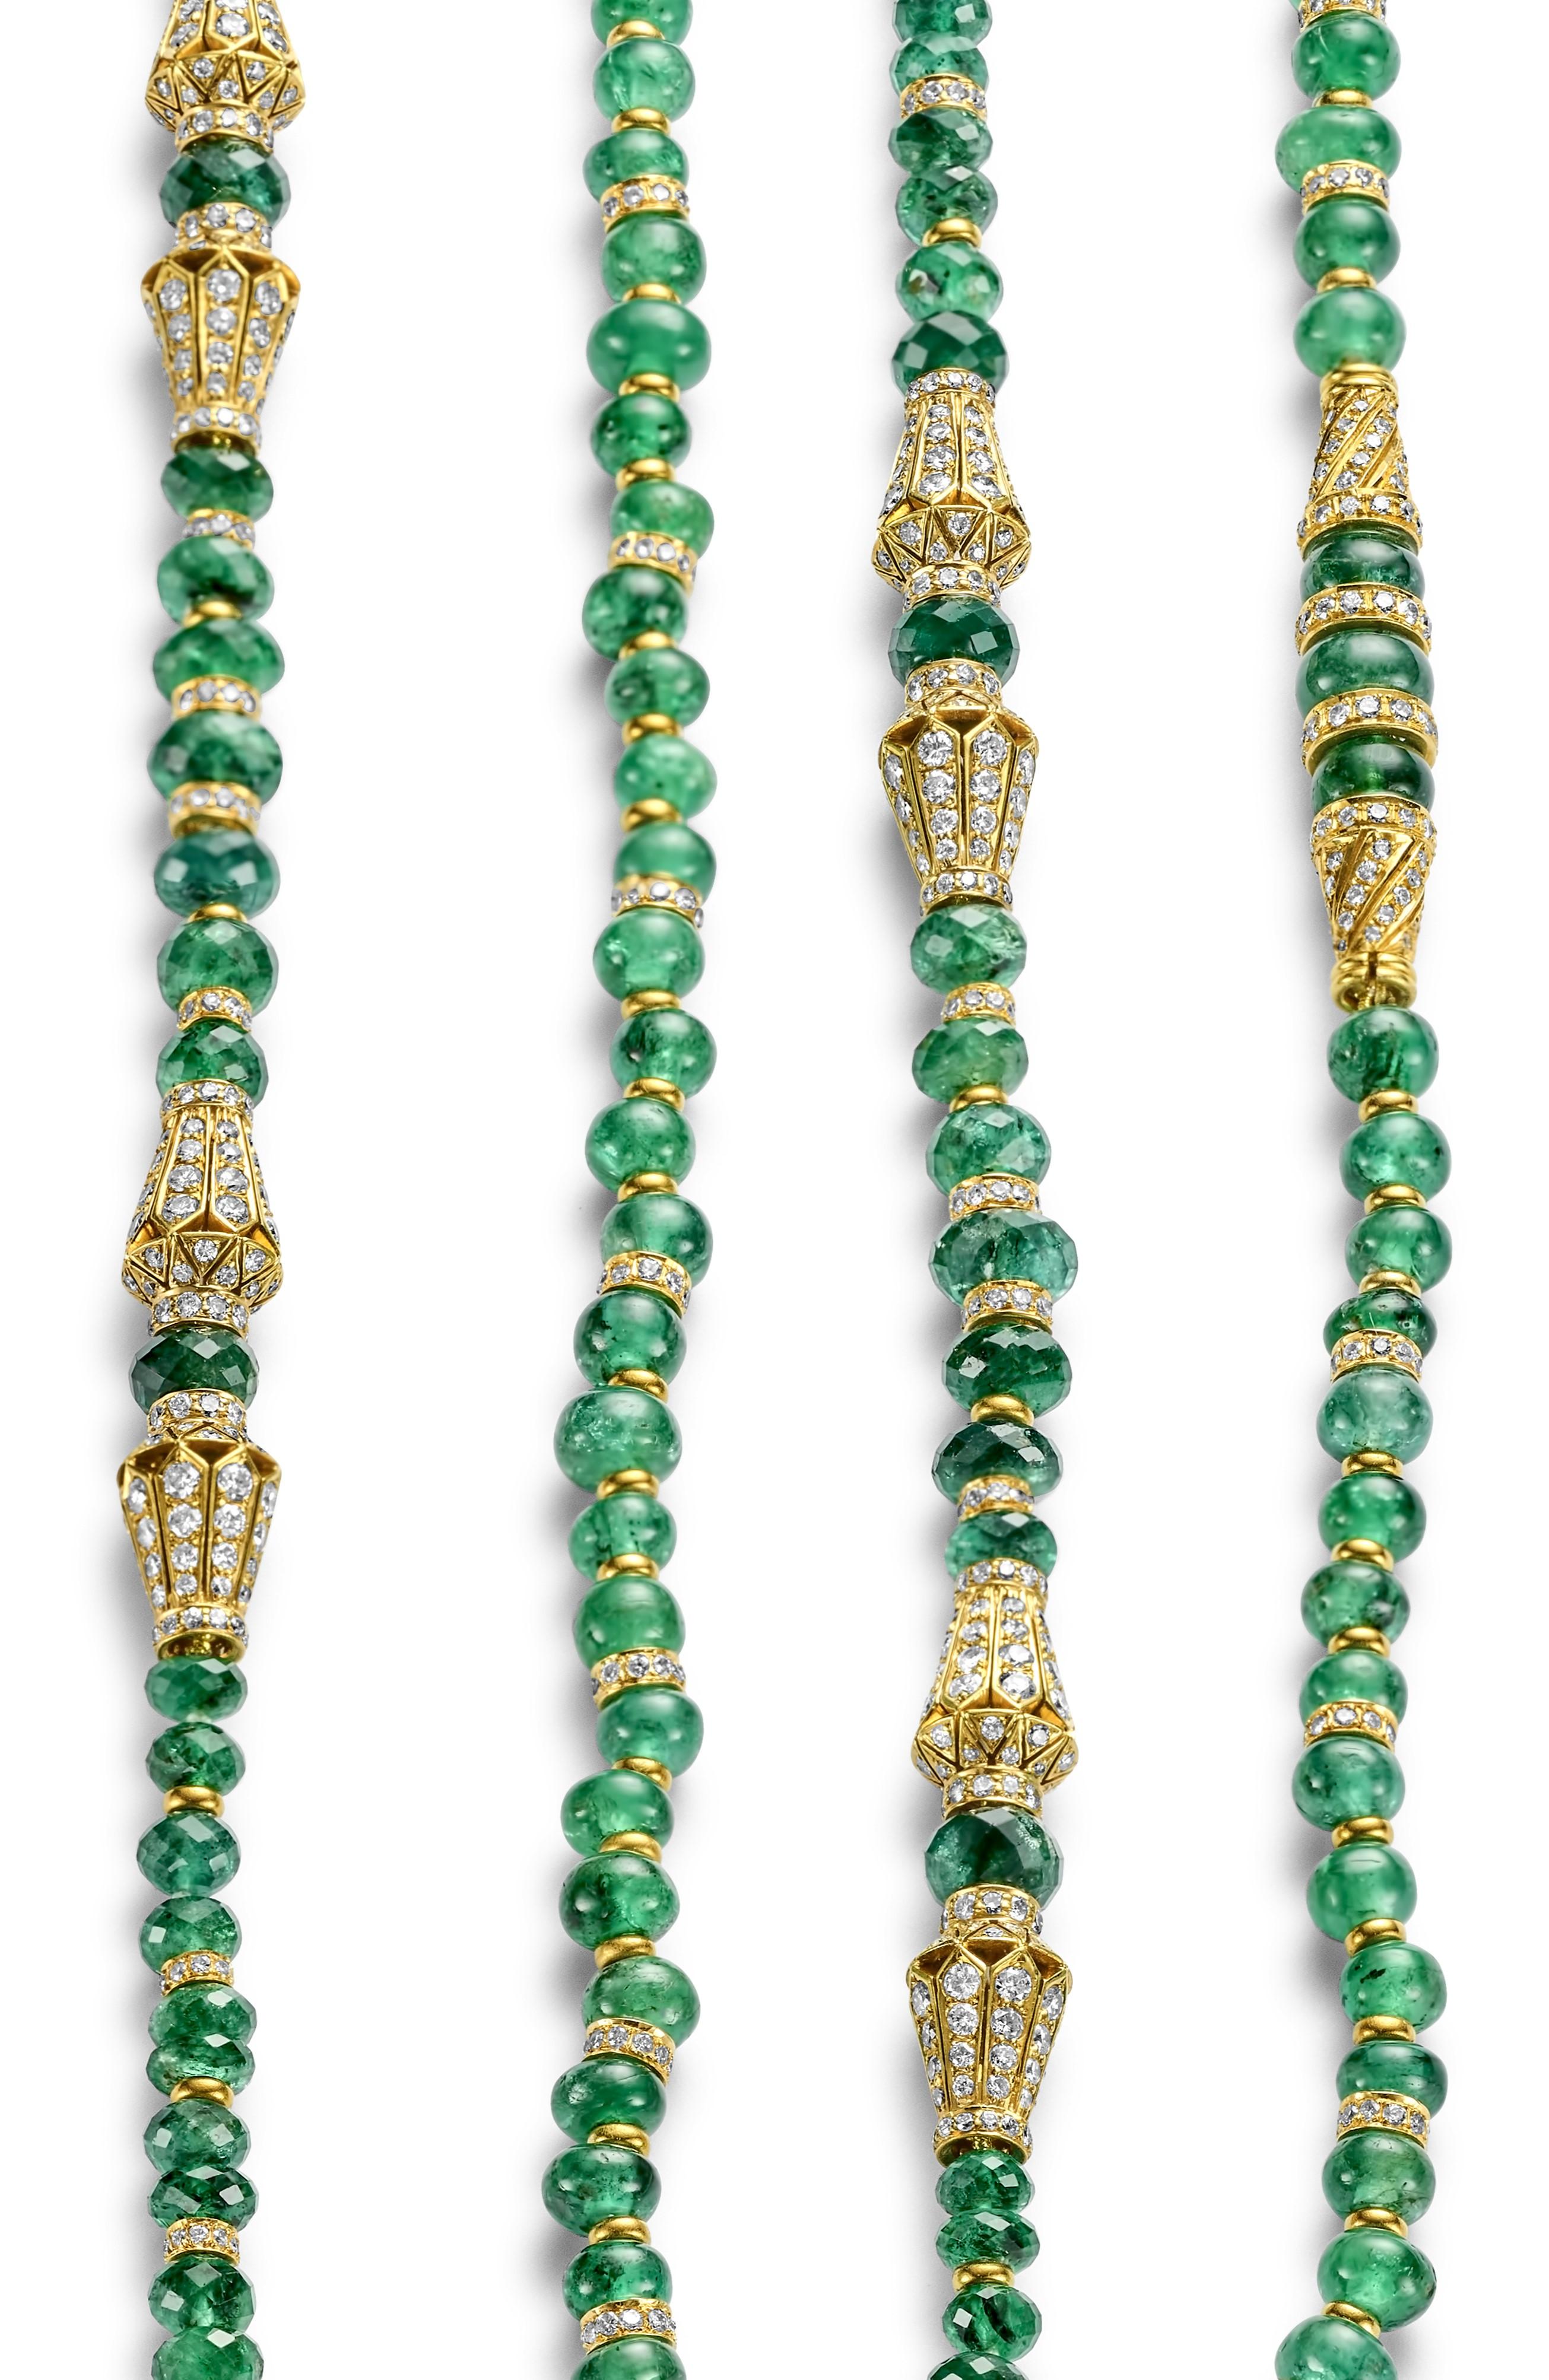 Adler Genèva 2 Necklaces 18kt Yellow Gold  with together 480 ct. Faceted Bead Emeralds CGL Certified fro Estate Sultan of Oman Qaboos Bin Said

Emeralds: Together 480 ct. intense green (Faceted) Bead Emeralds 
Both necklaces come with a certificate